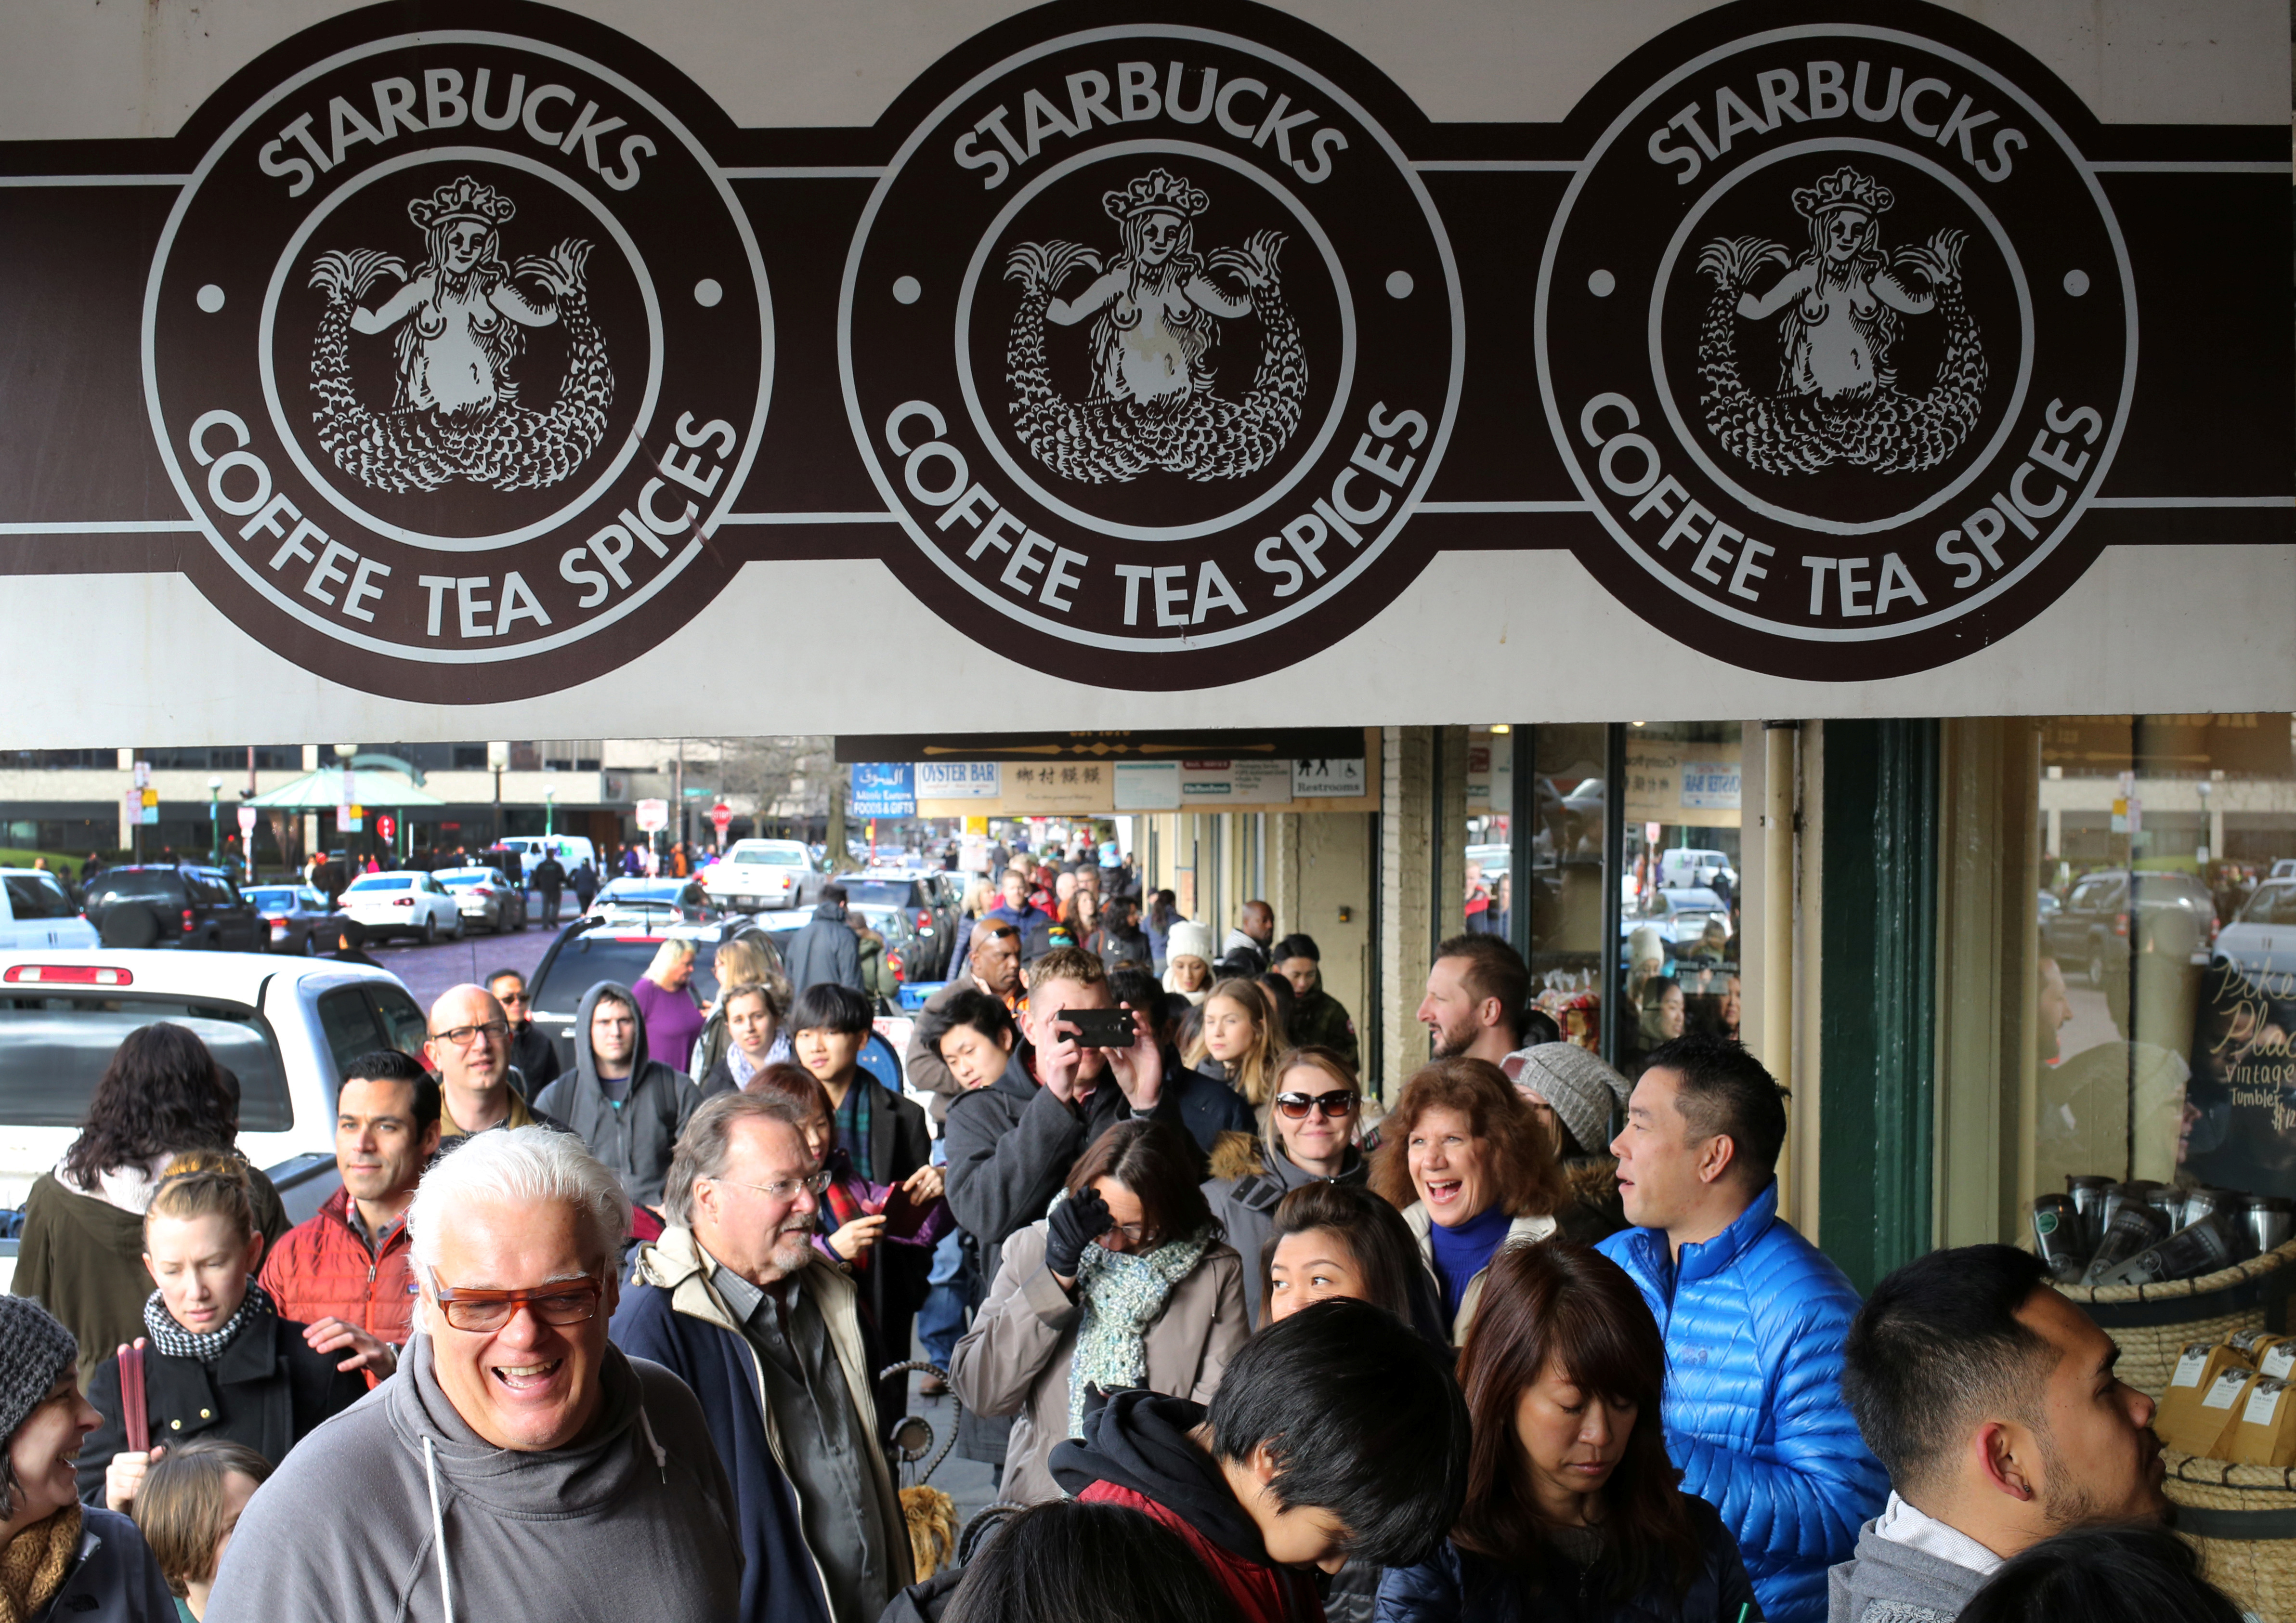 People form a line to enter the original Starbucks coffee shop at Pike Place Market in Seattle